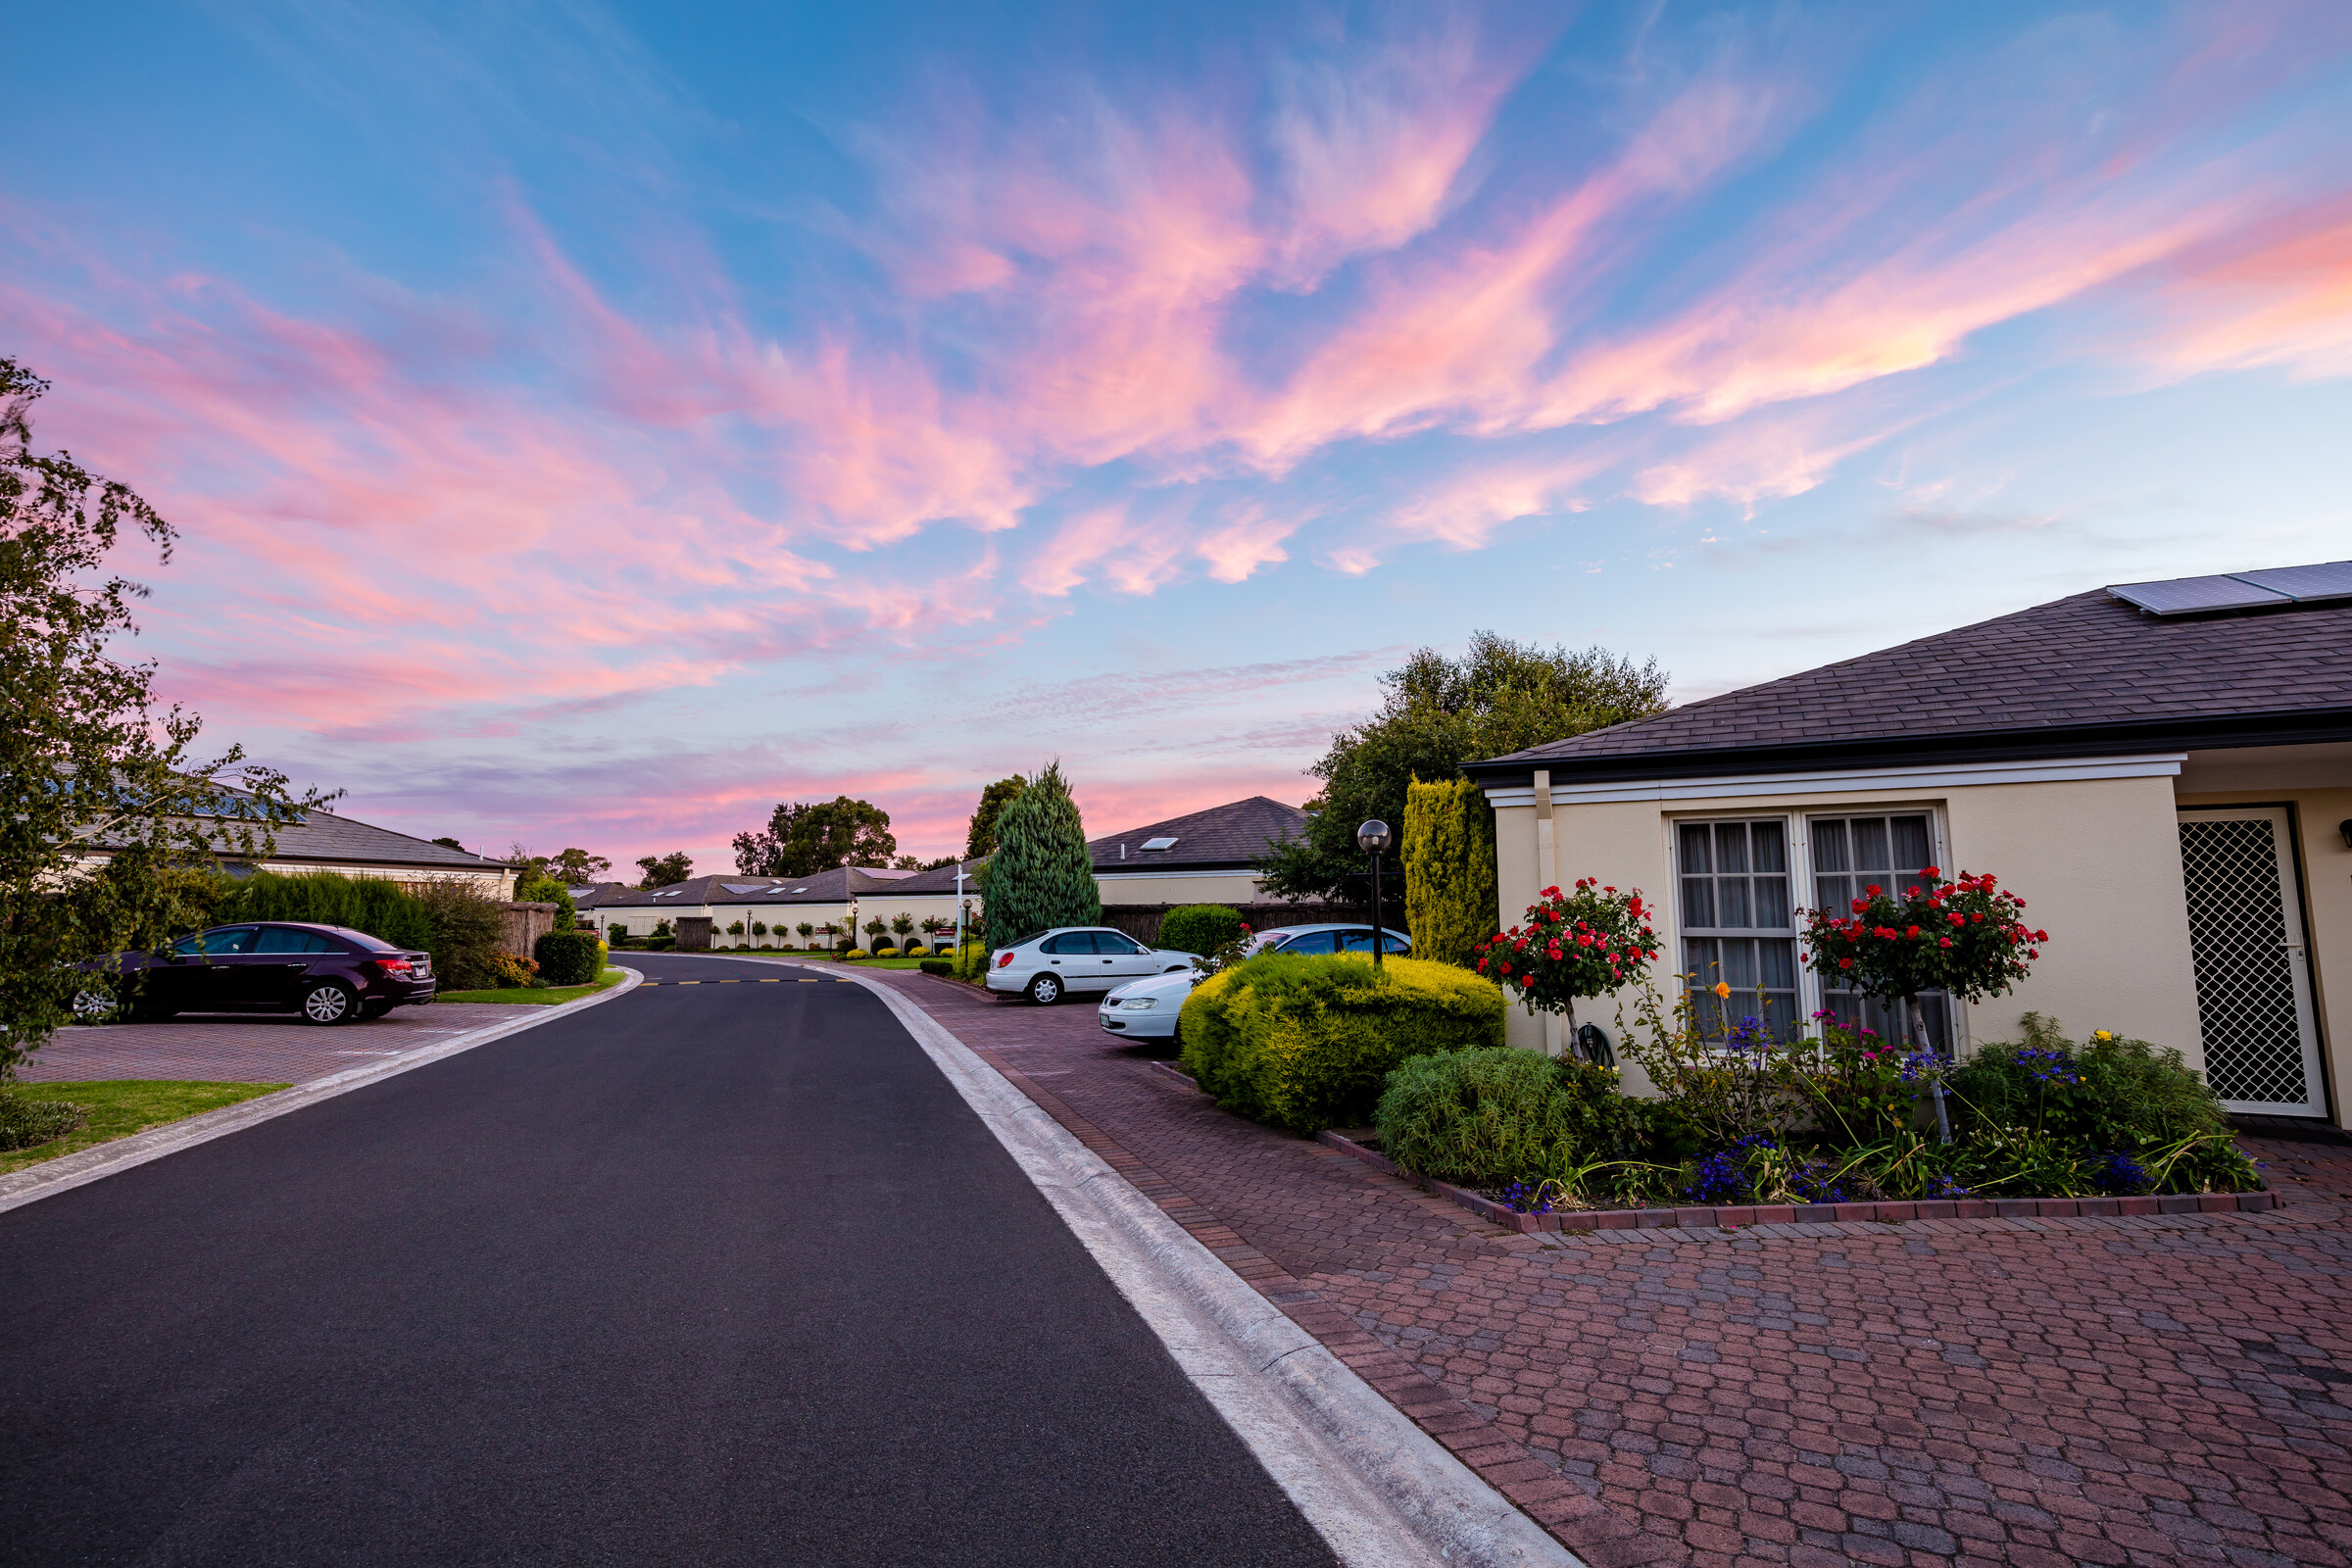 Port Phillip Village evening image of road lined with houses and gardens